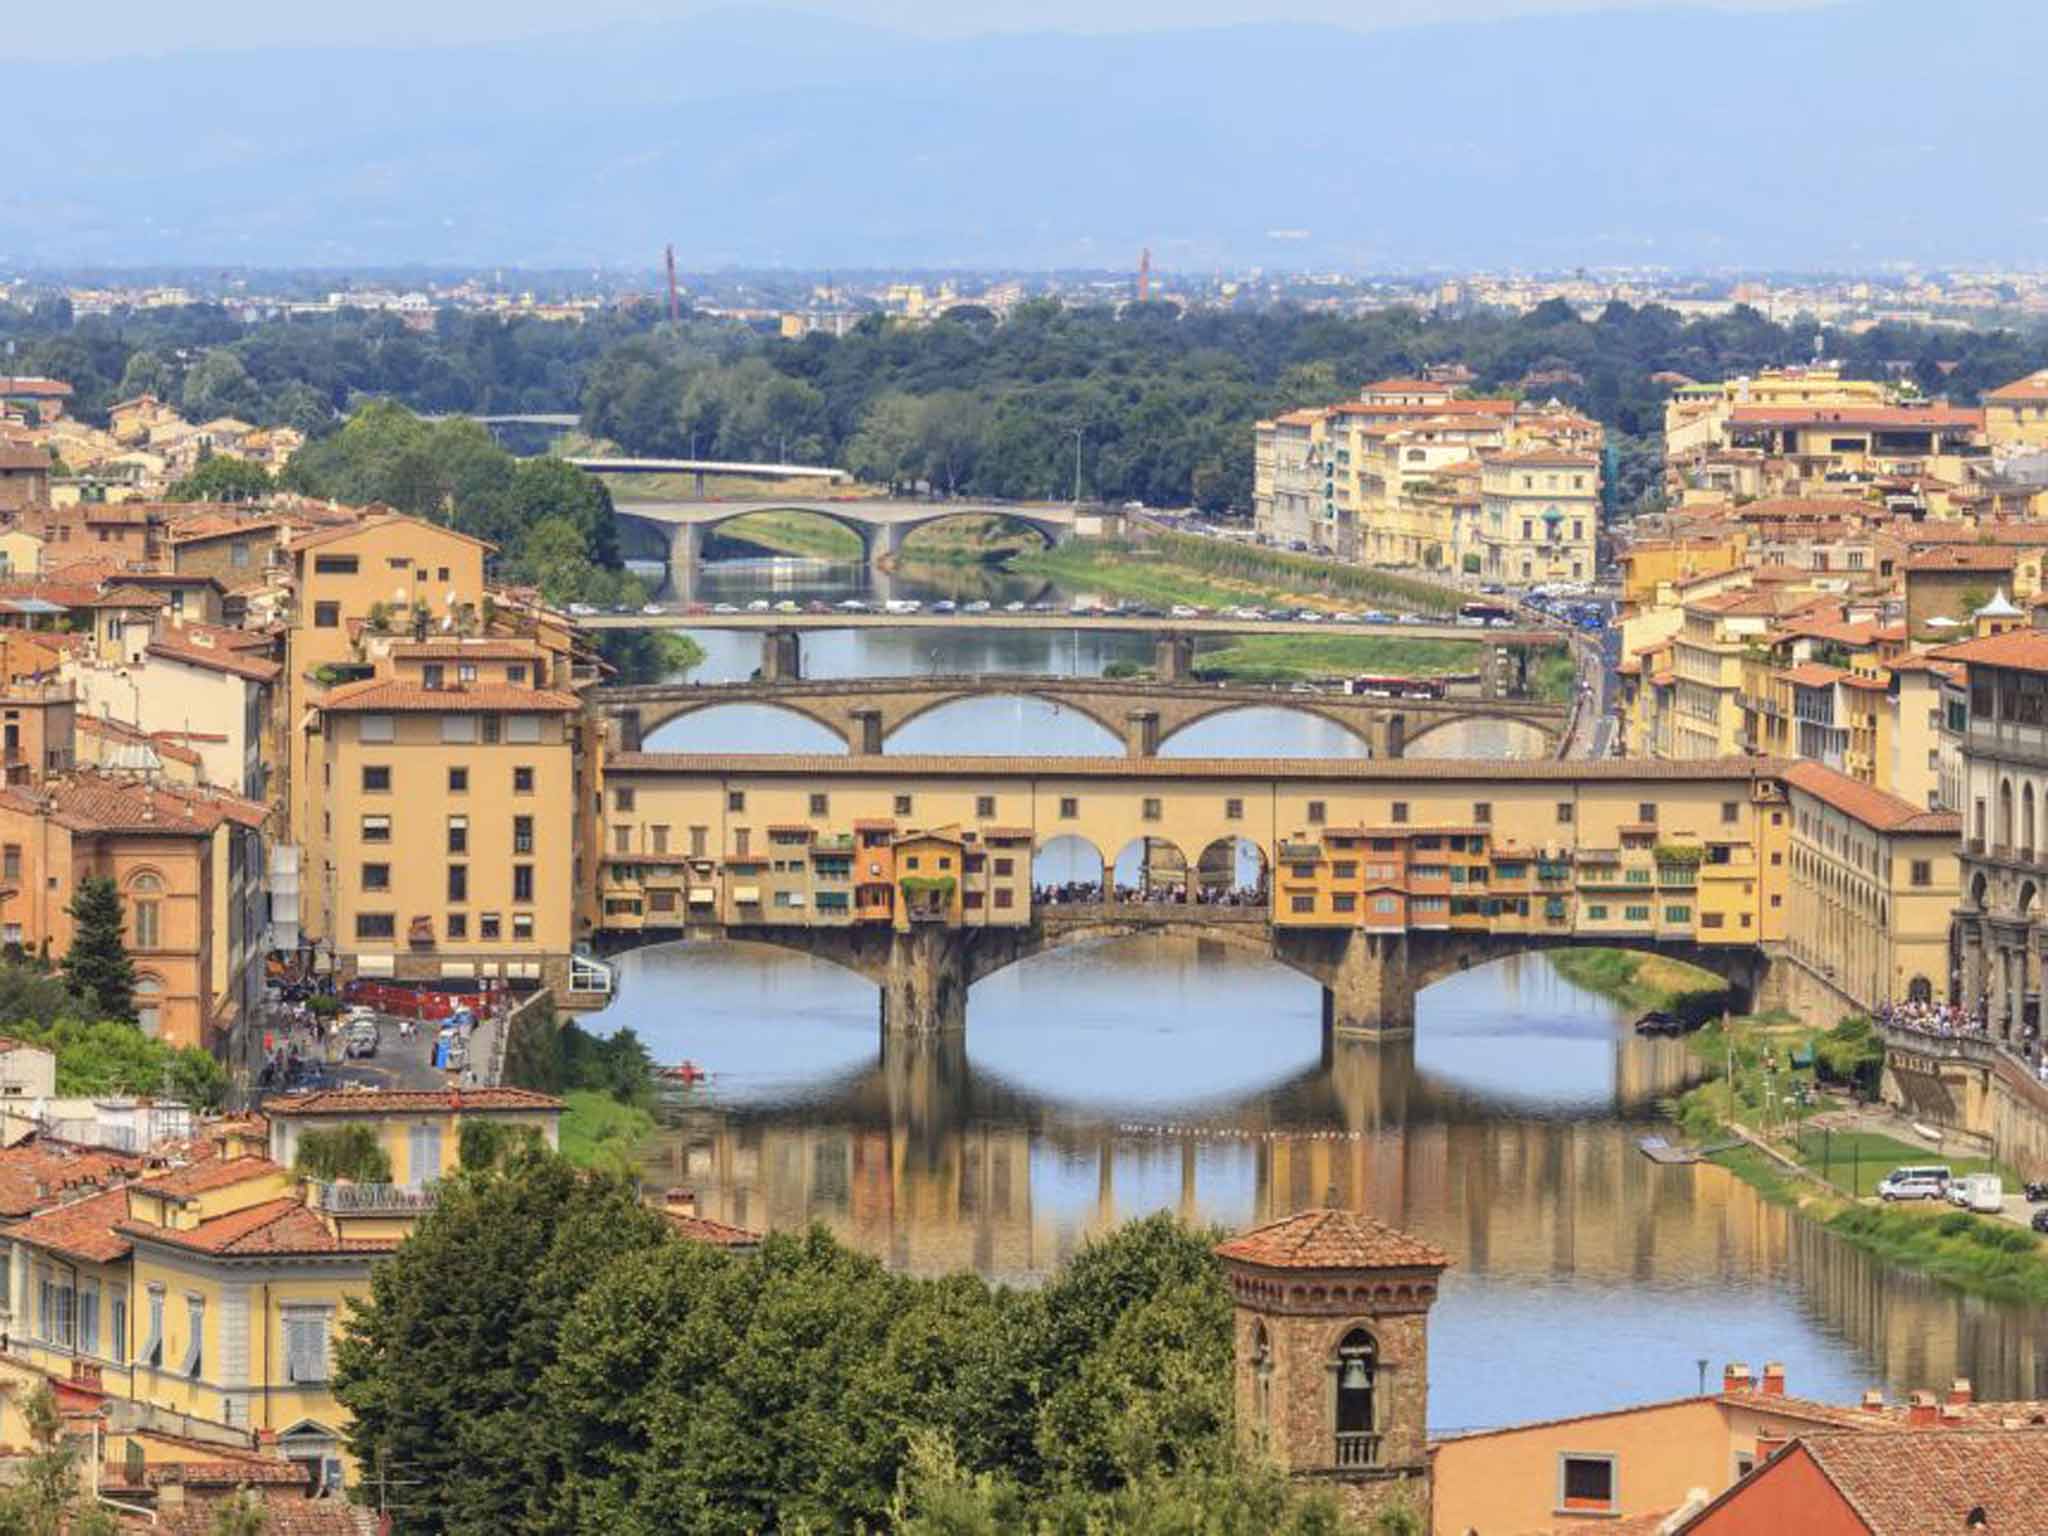 La dolce vita: Tommy was charmed by Florence